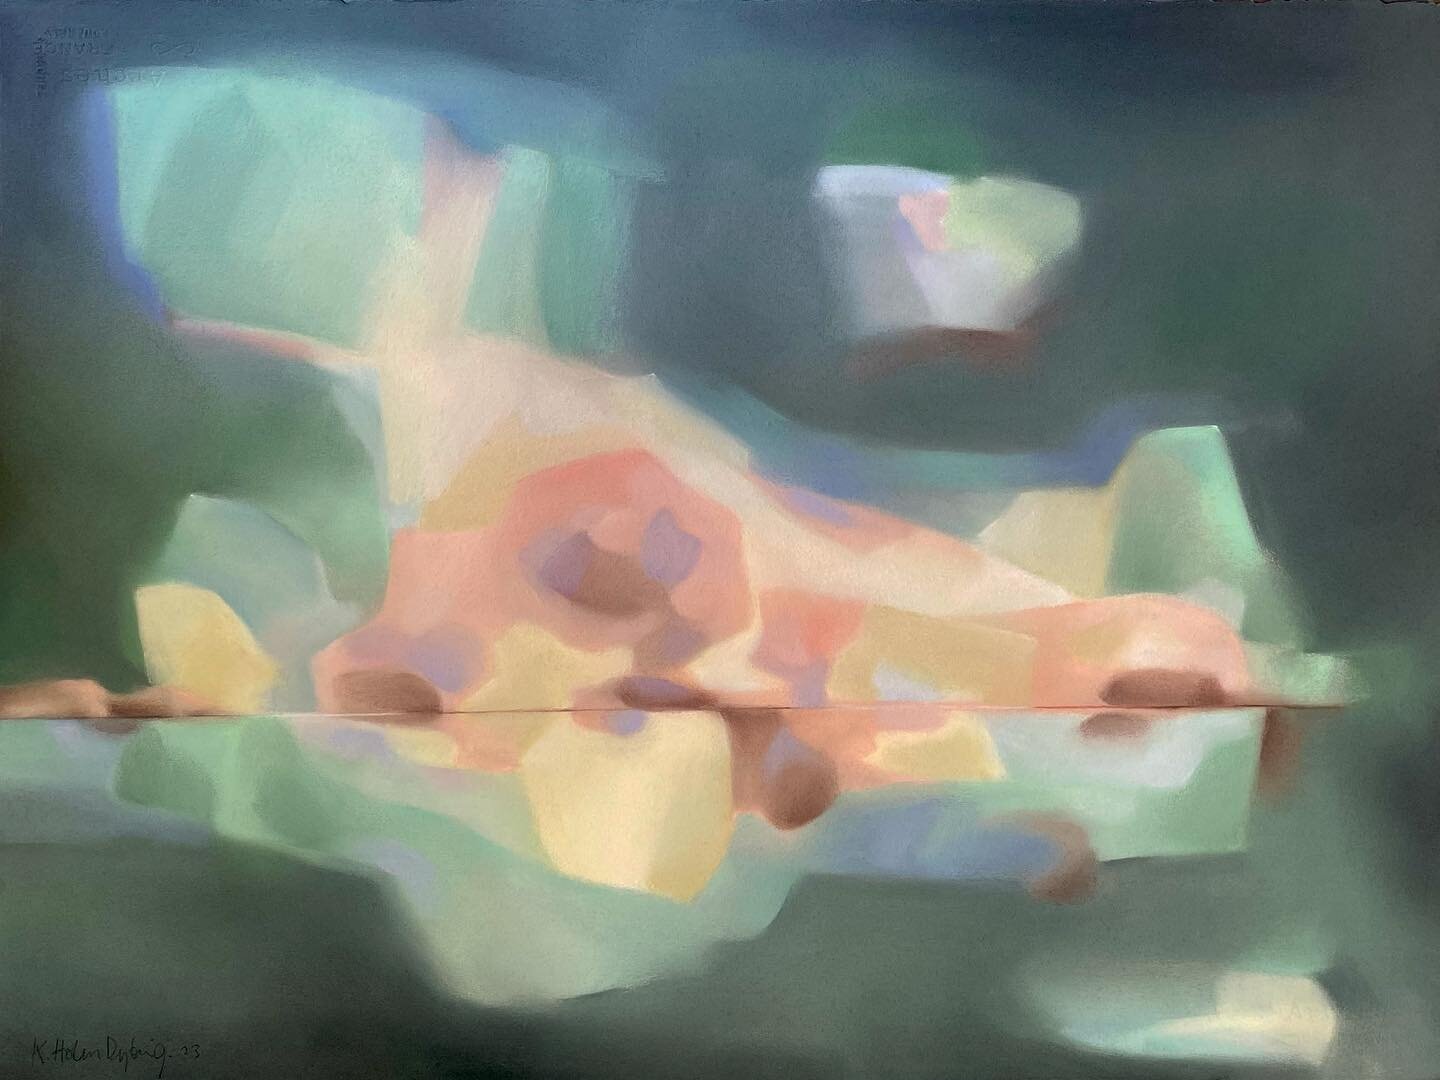 Dawning. Morning Breeze

Size: 56 x 76 cm
Pastels on paper

&ldquo;Take the mother night
Wrap her in glorious dawn
To birth a new day&rdquo;

This Haiku poem by an unknown author describes the early morning mood beautifully. 

#kristinholmdybvig #daw